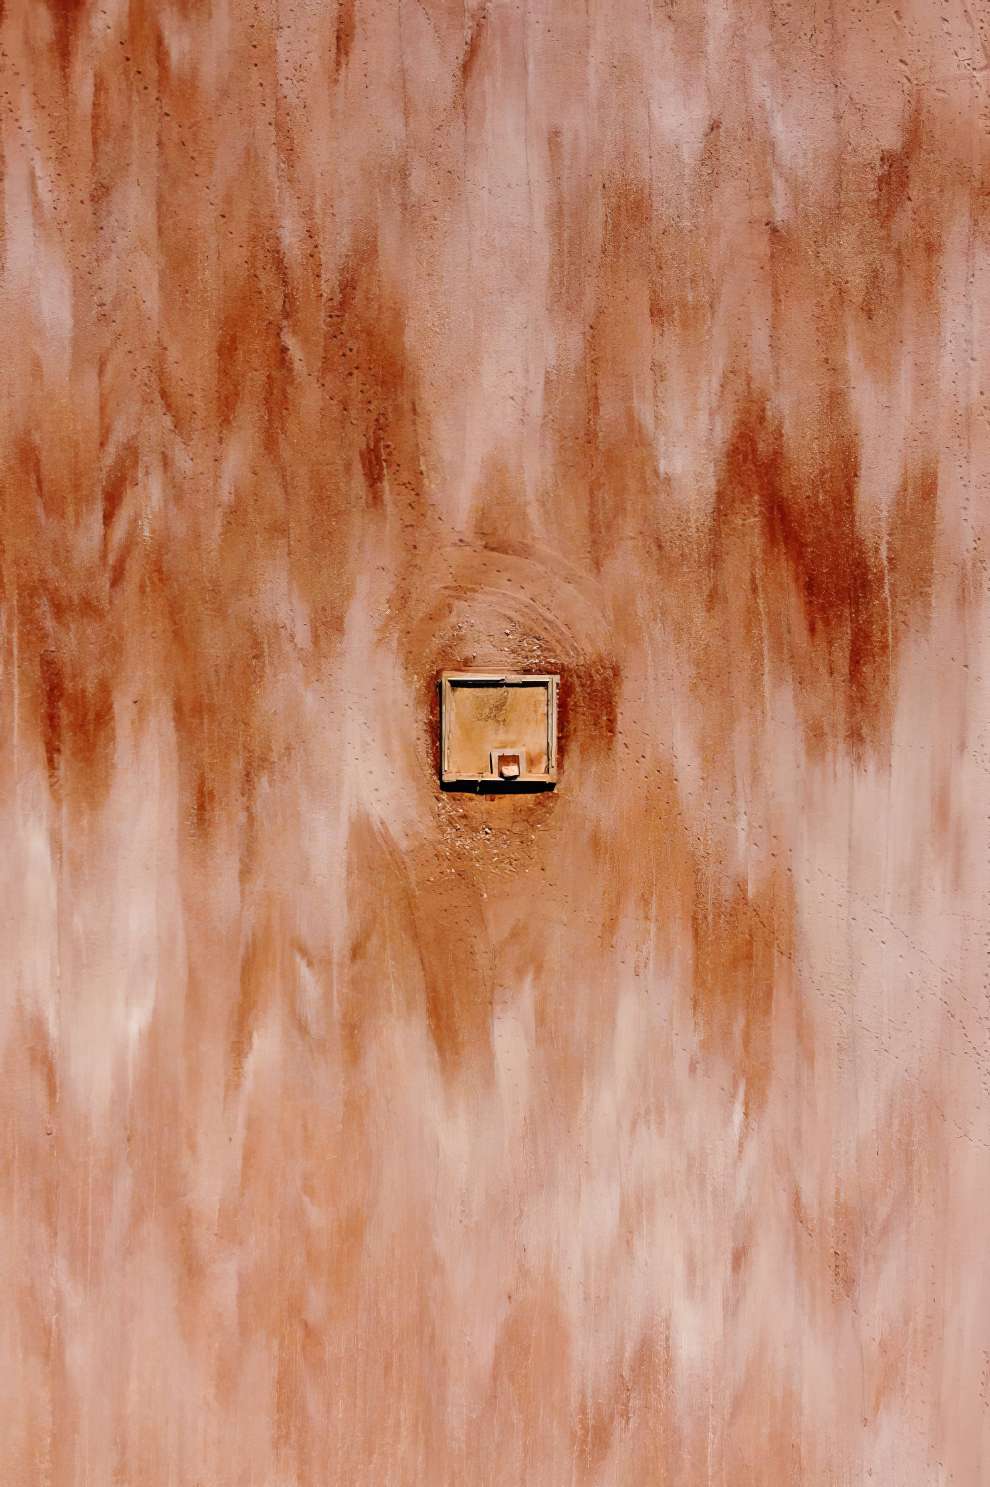 17 Abstract Drone Photo Awards Winners 